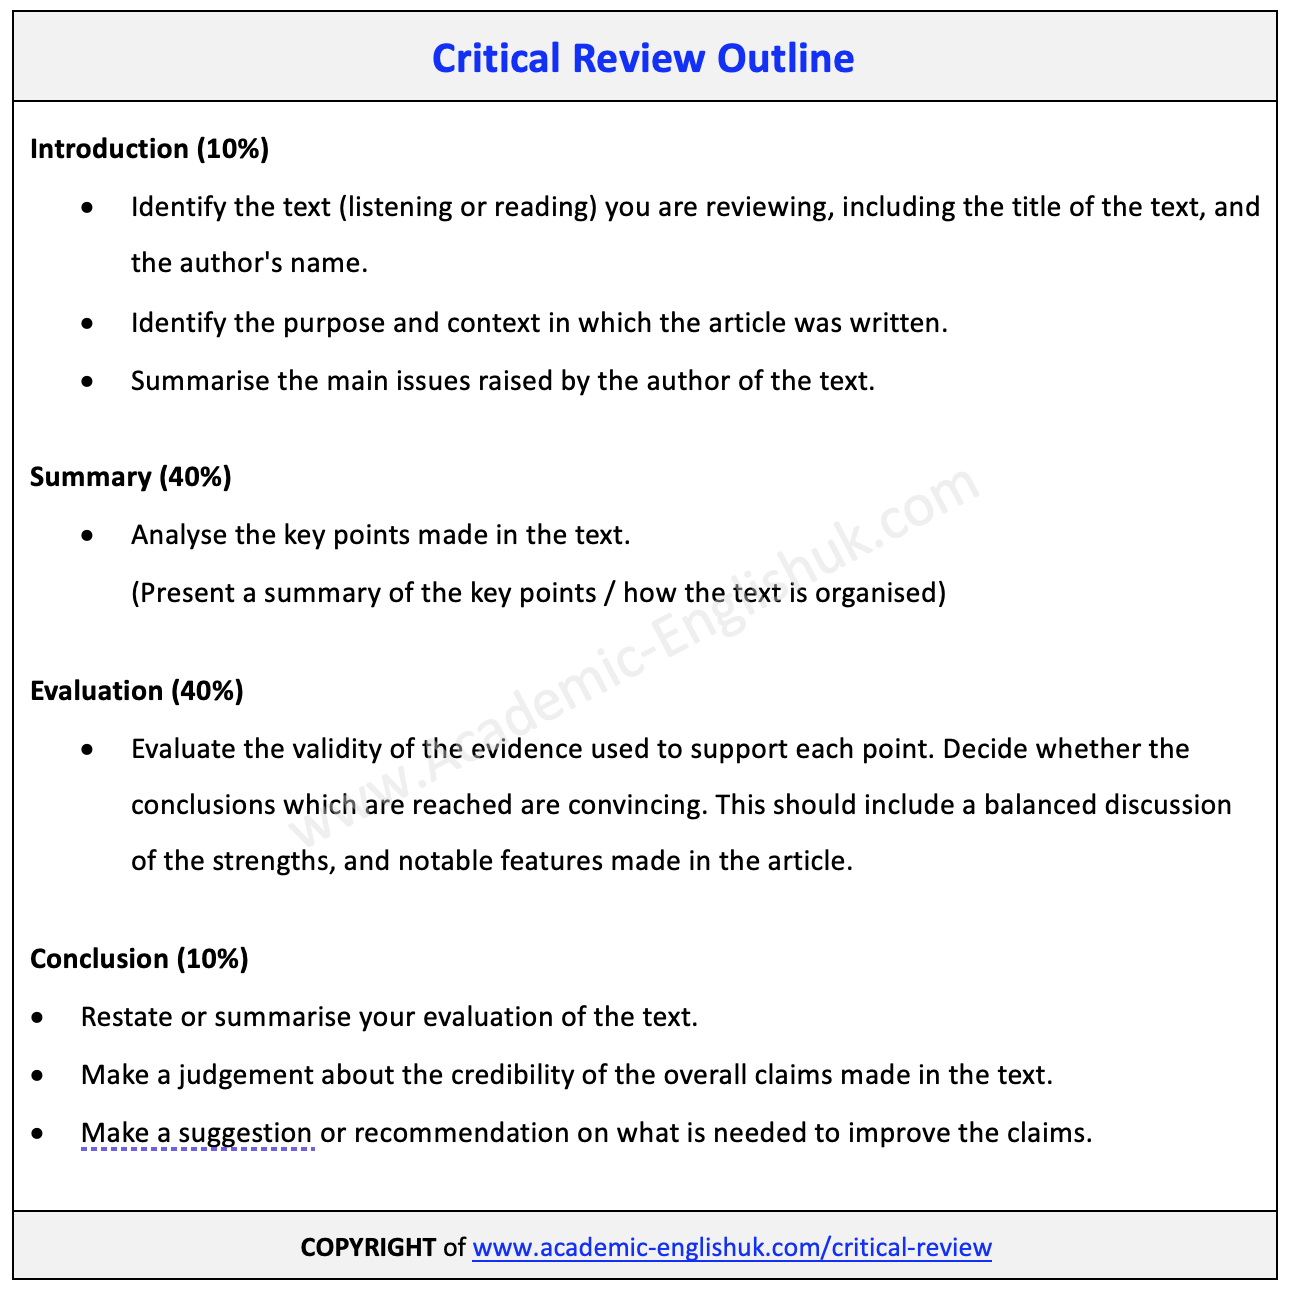 Critical Review Outline